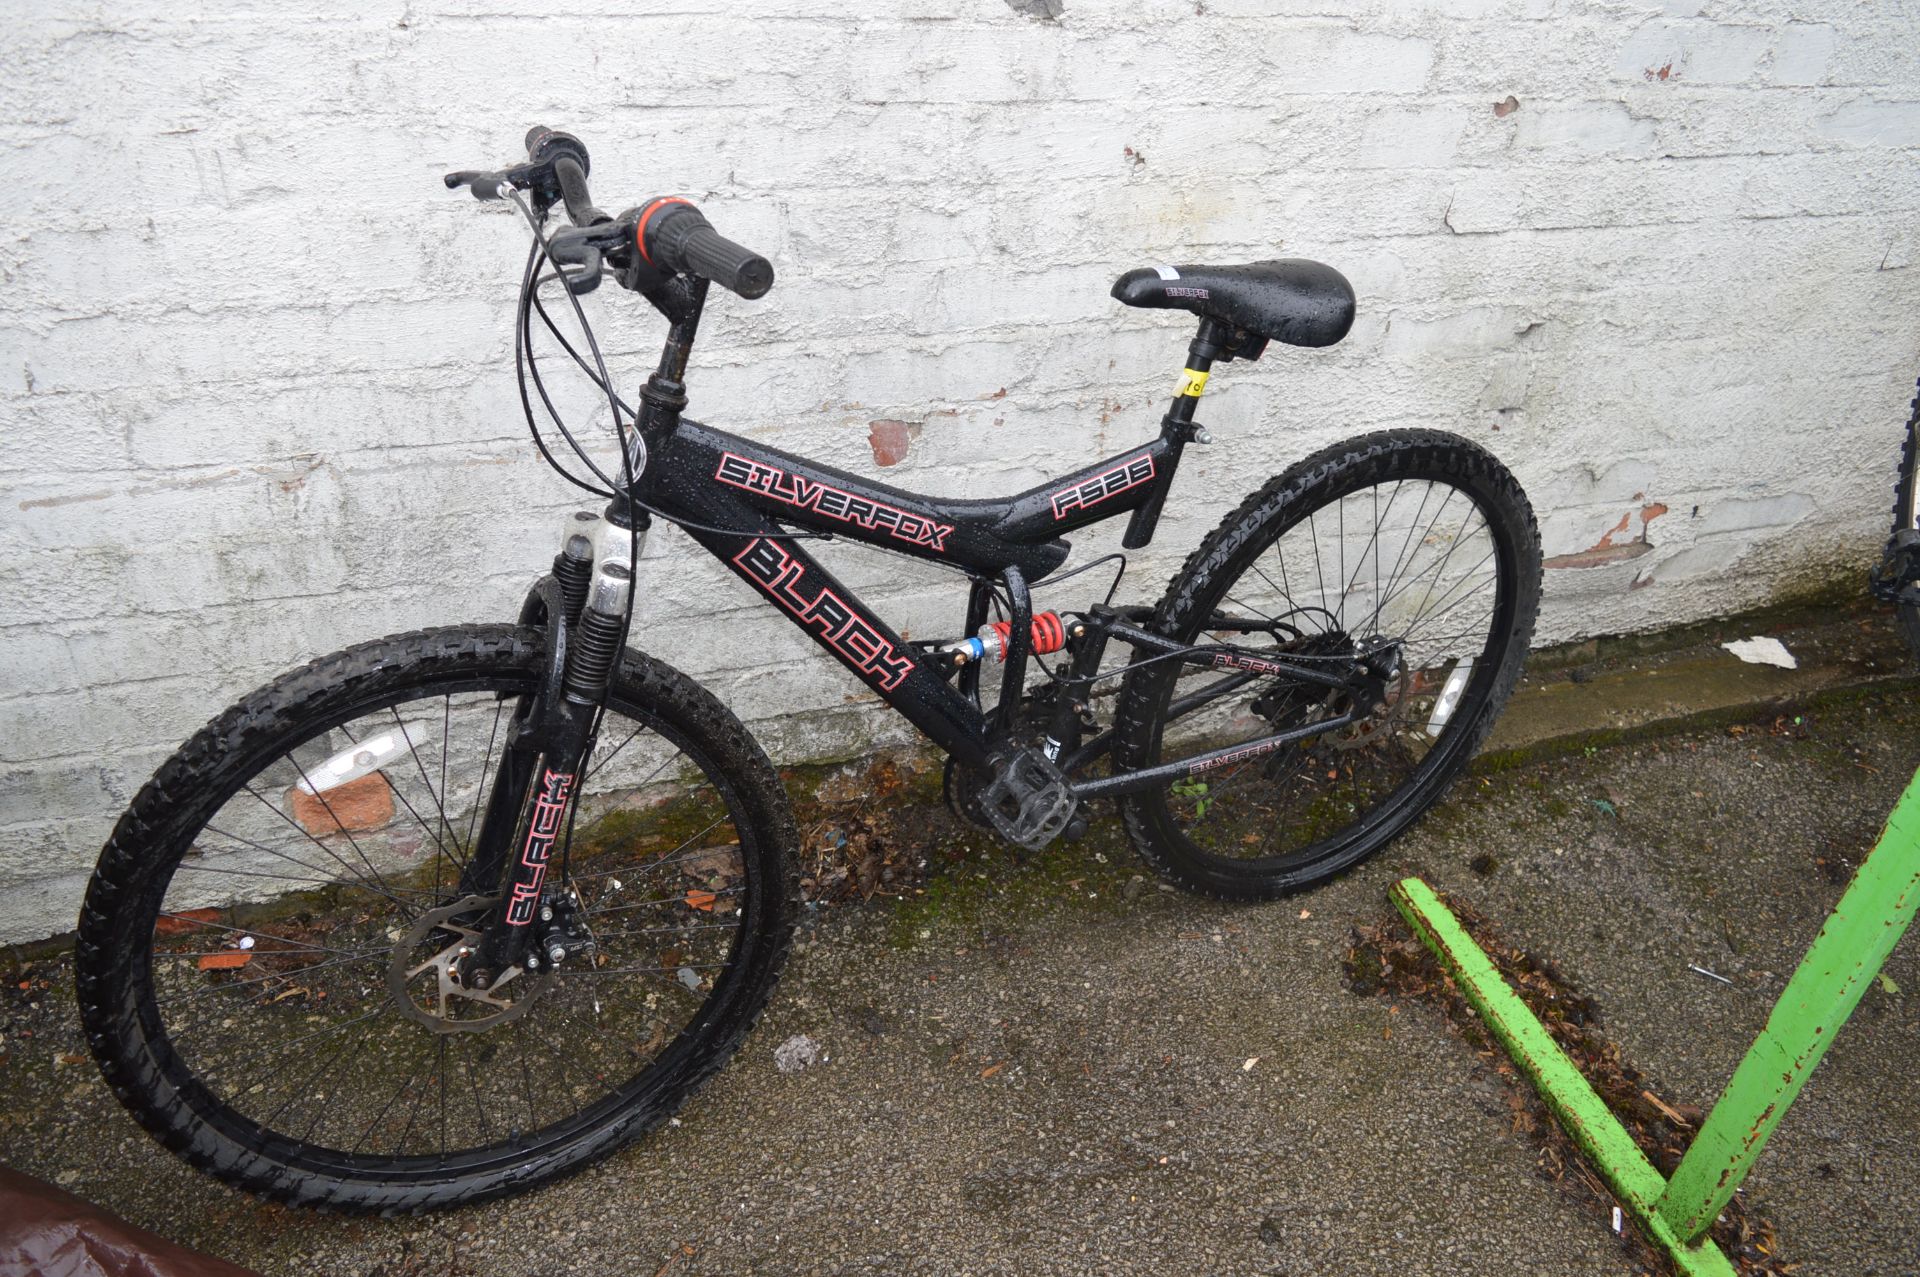 SilverFox F526 Mountain Bike With Suspension and Disk Brakes